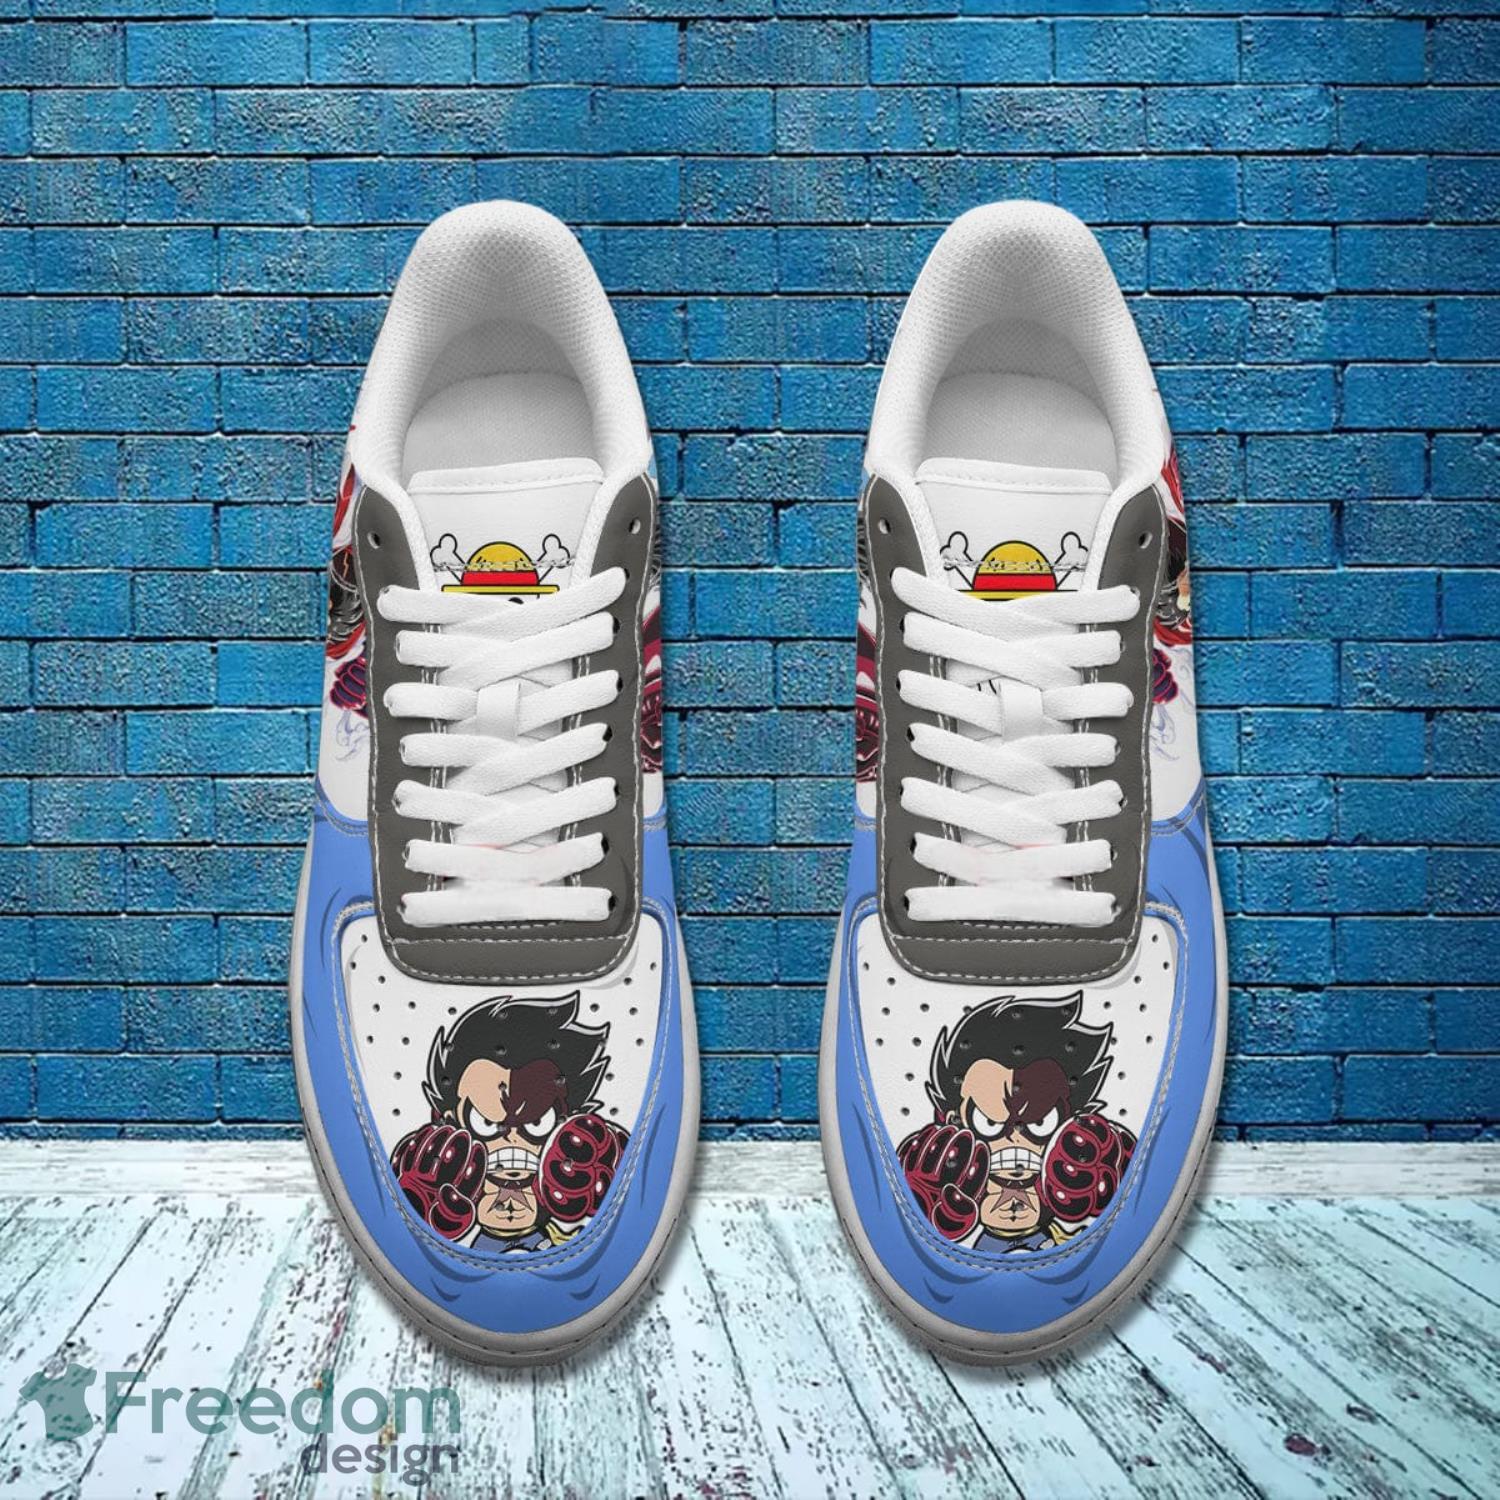 One Piece Monkey D. Luffy Gear 4 Air Force Shoes Gift For Anime's Fans